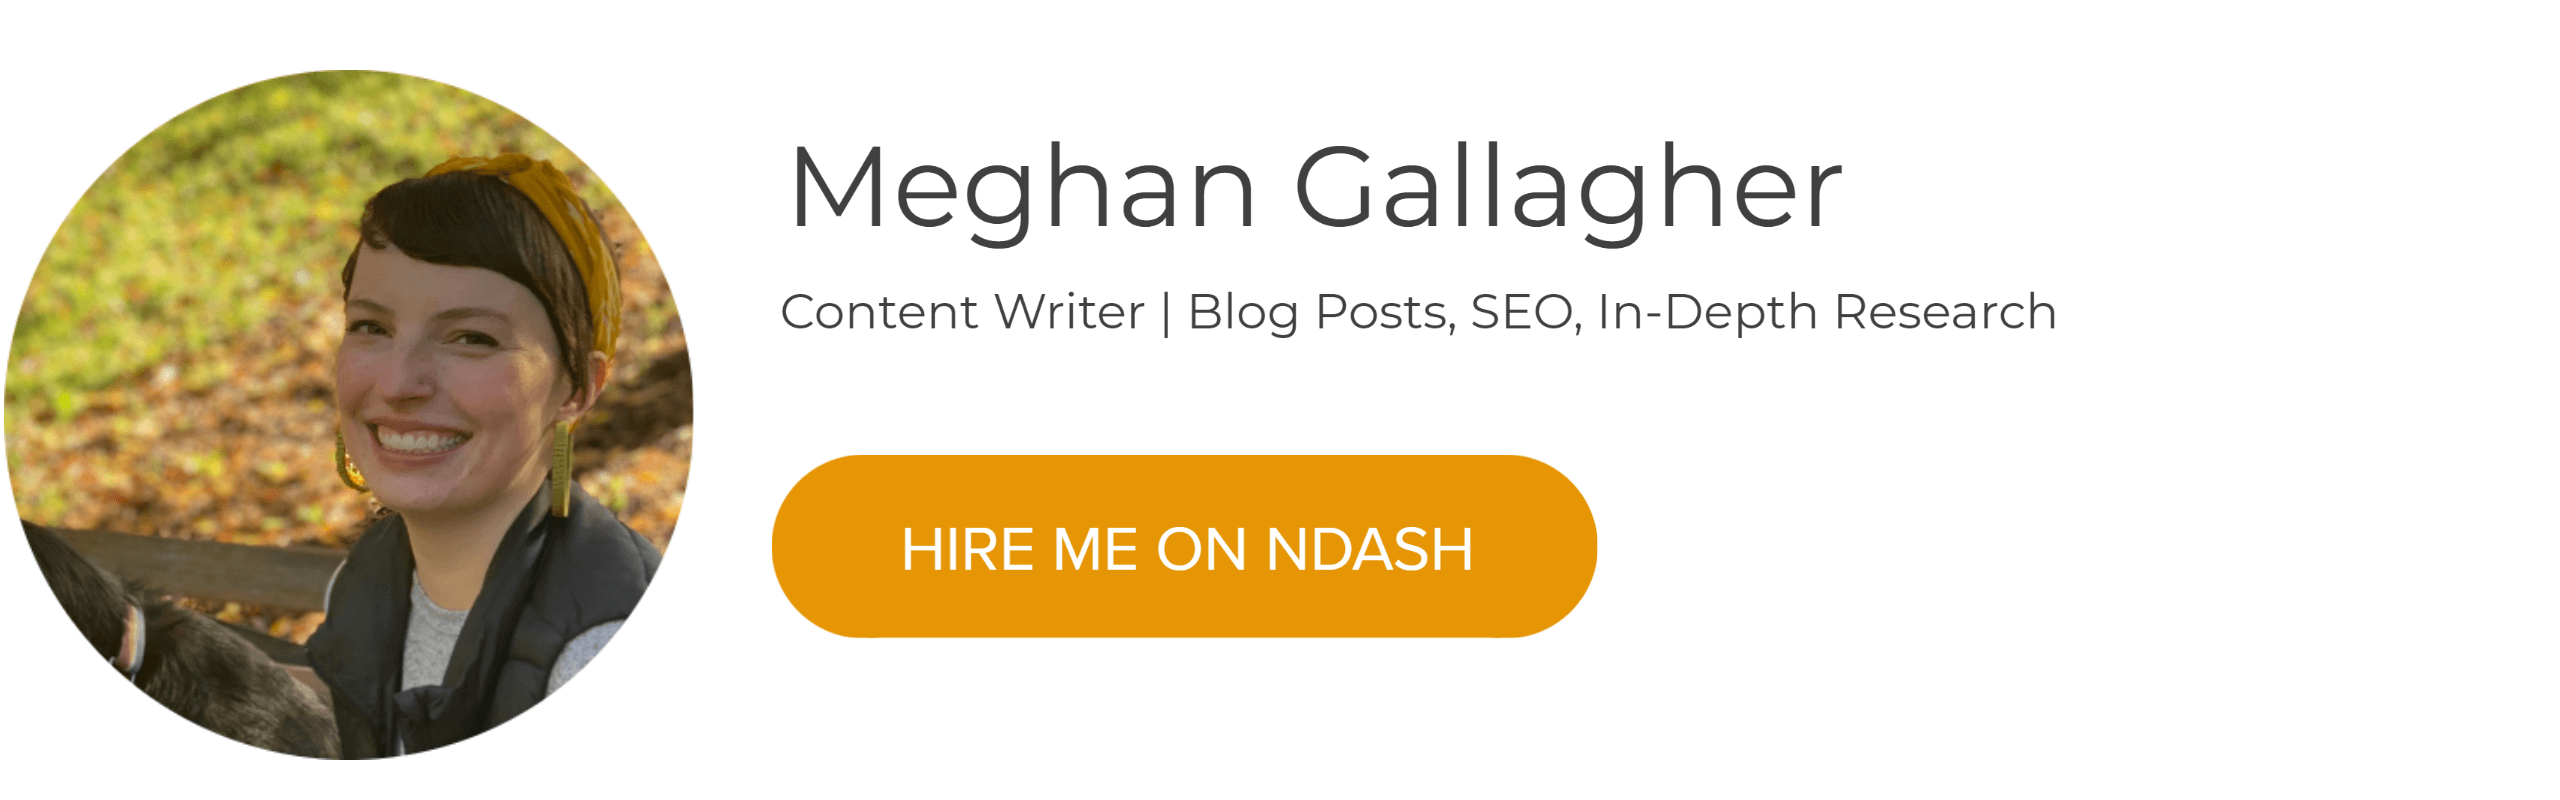 Meghan Gallagher: Content Writer